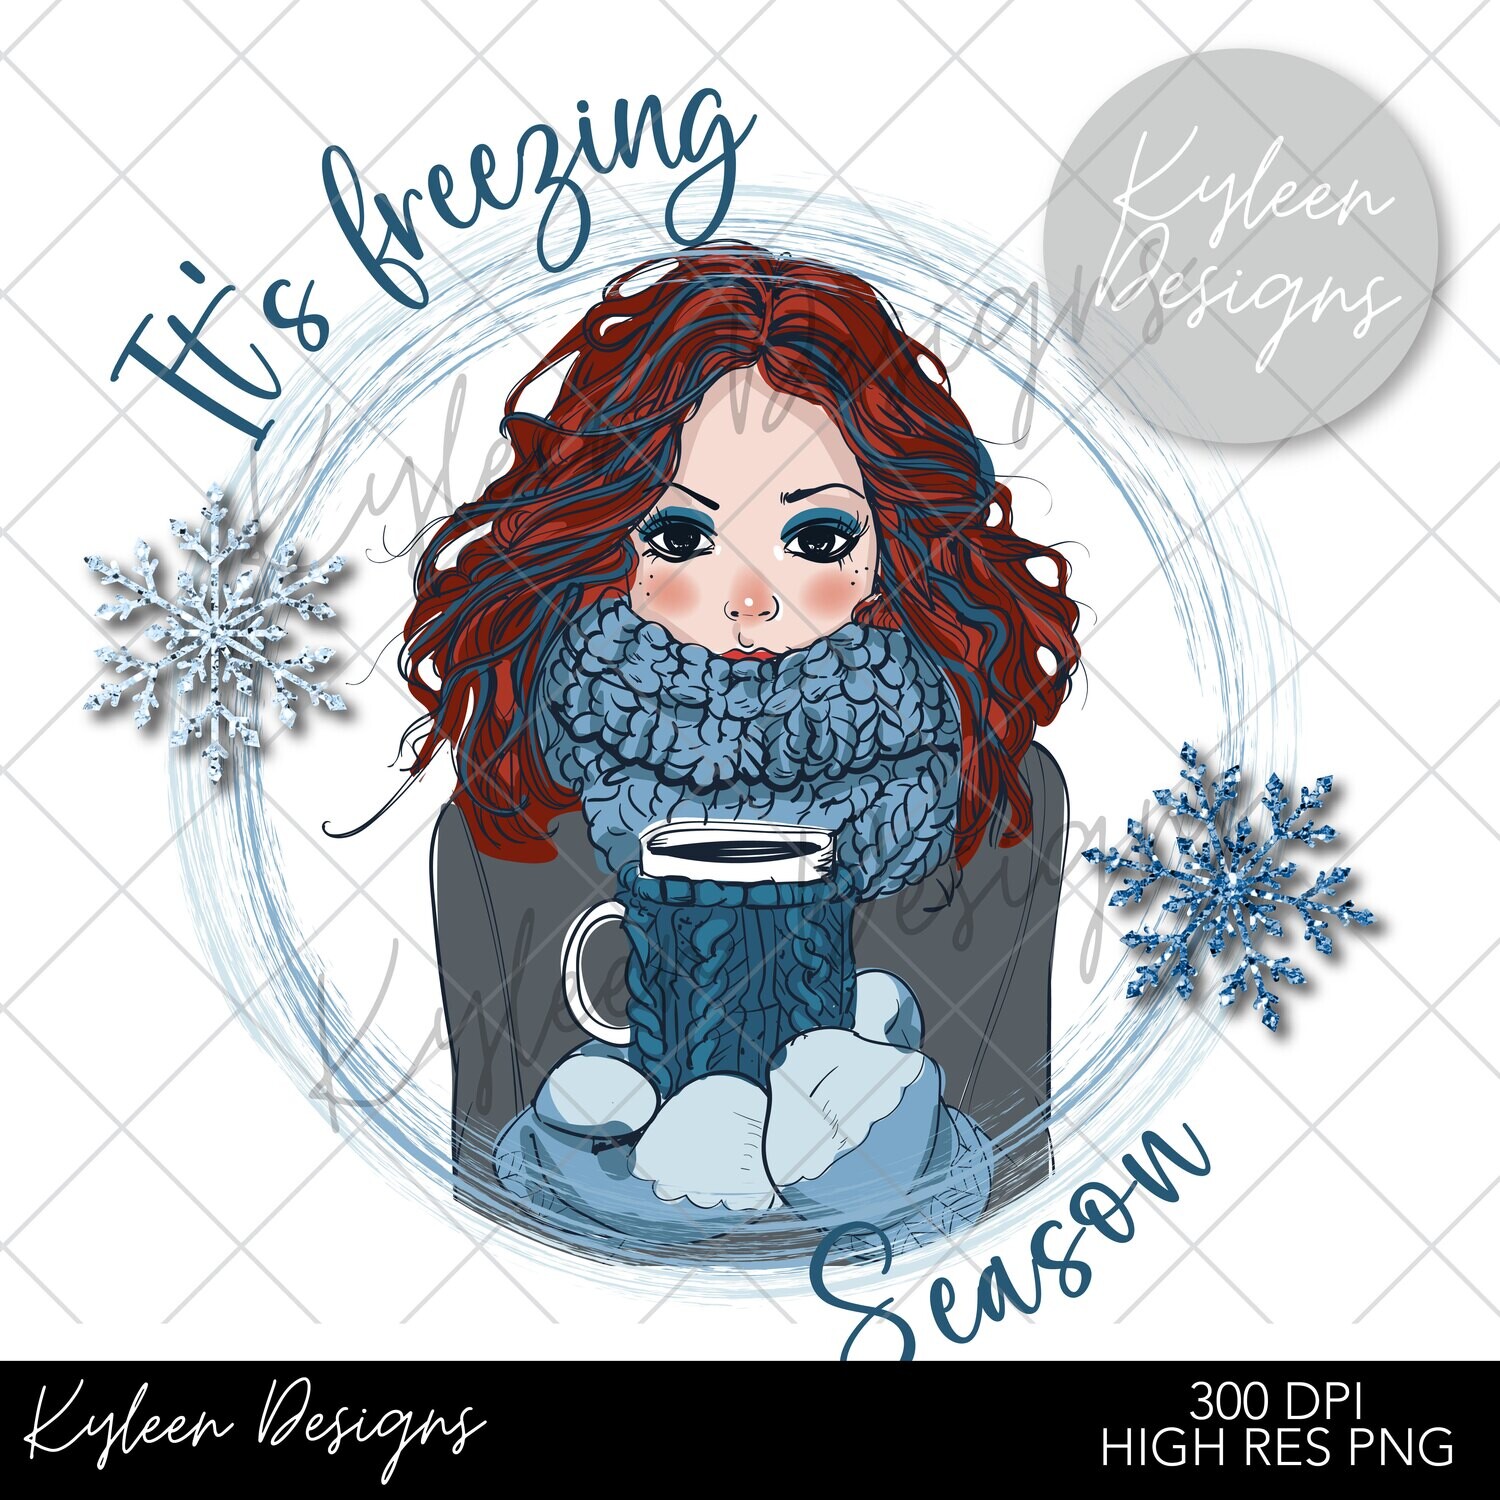 It's freezing season for sublimation, waterslide High res PNG digital file-Red head